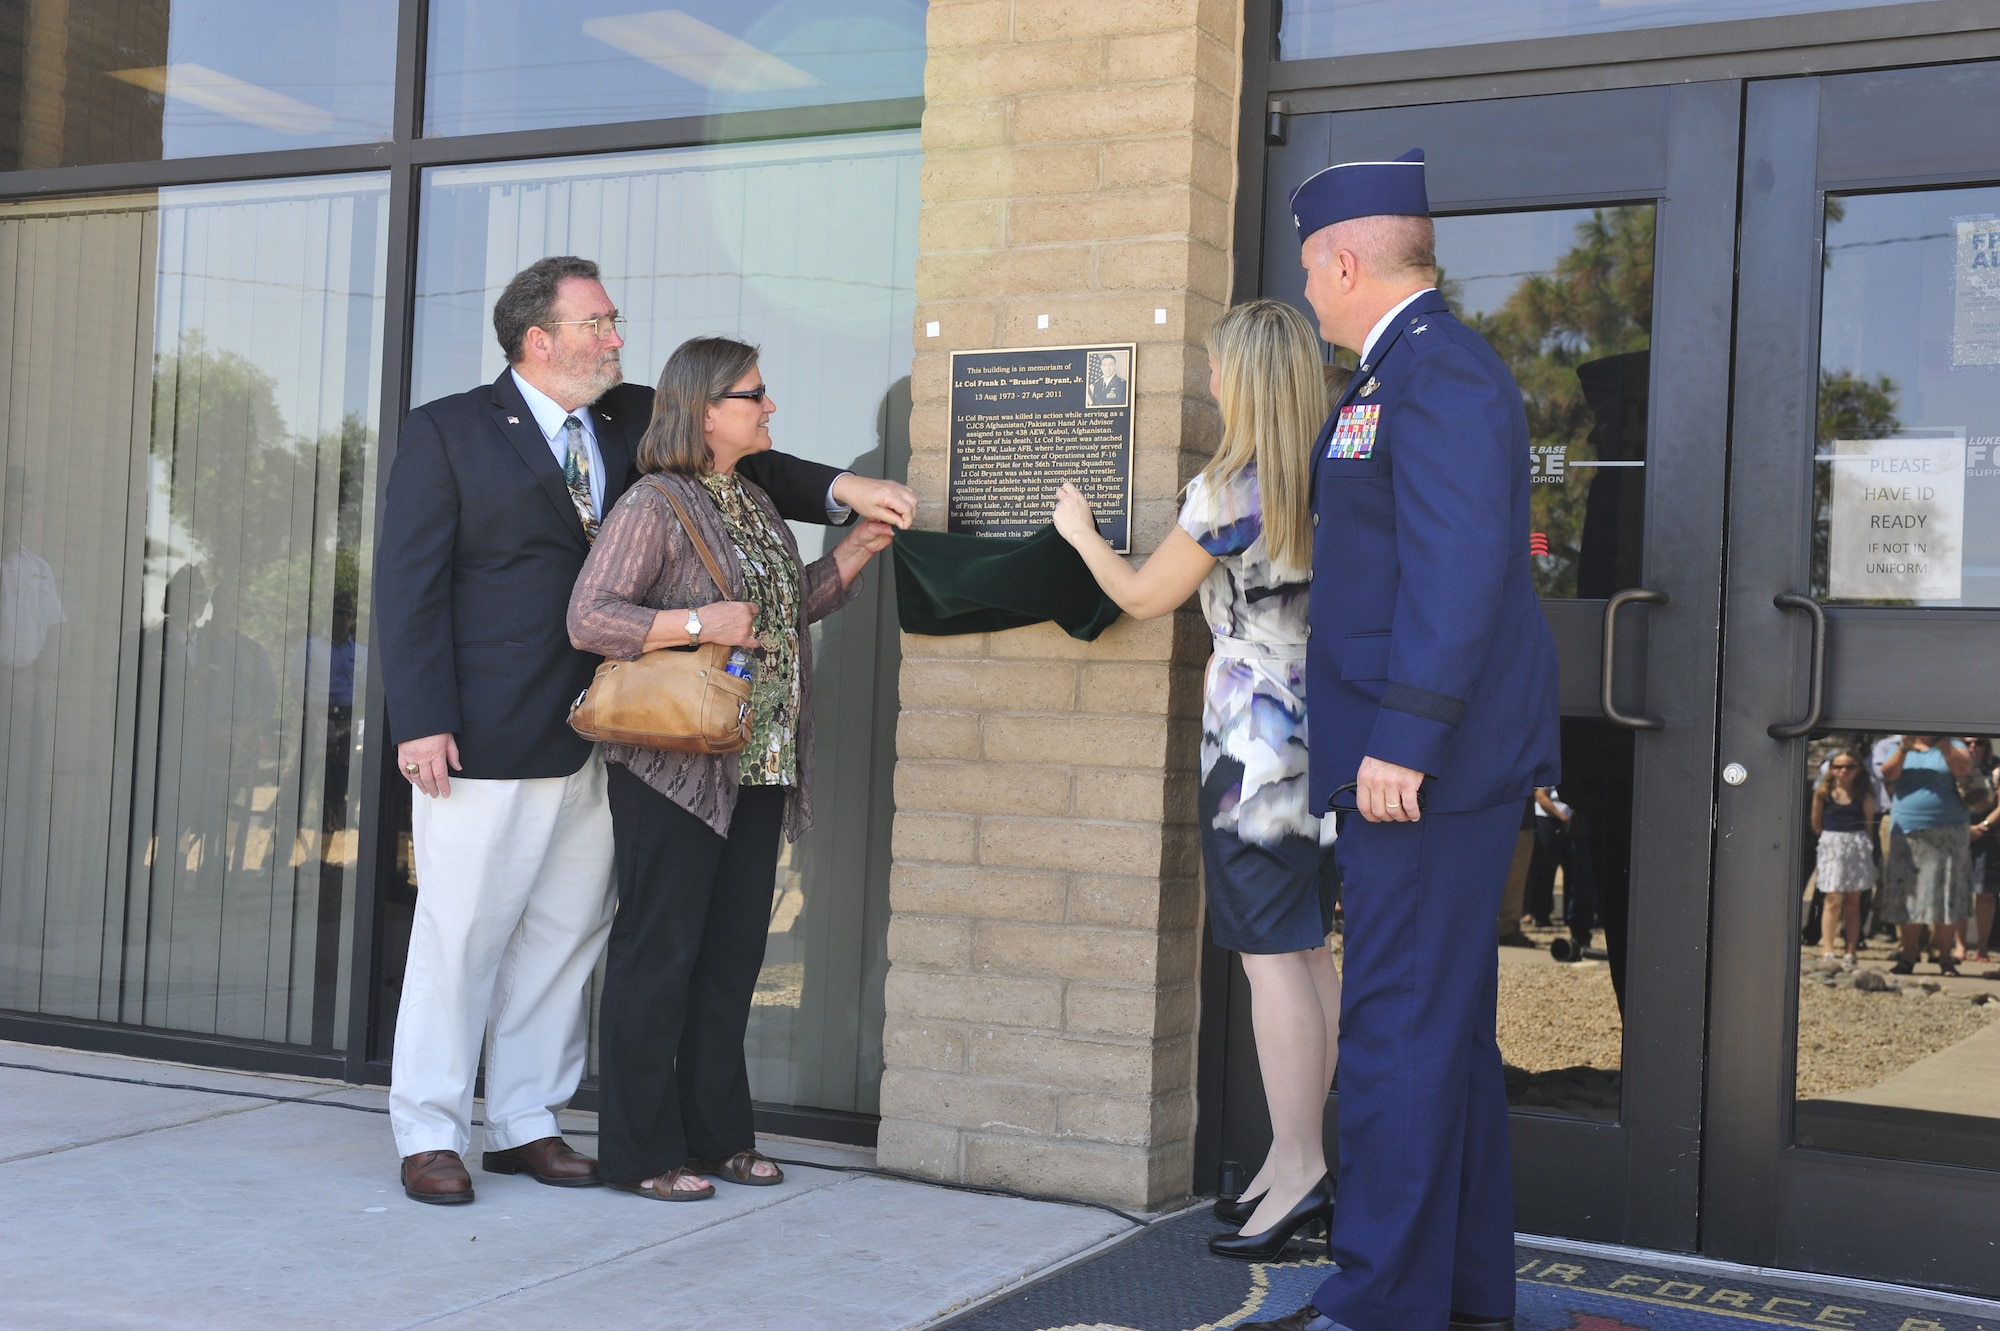 Father, Frank Sr.; mother, Patricia; and wife, Janice; of Lt. Col. Frank Bryant Jr., unveil the memorial plaque placed at the entrance of the fitness center Monday at Luke Air Force Base. The plaque details the life and career of Bryant, explaining how he was killed in action in Afghanistan.   (U.S. Air Force photo by Staff Sgt. Jason Colbert)